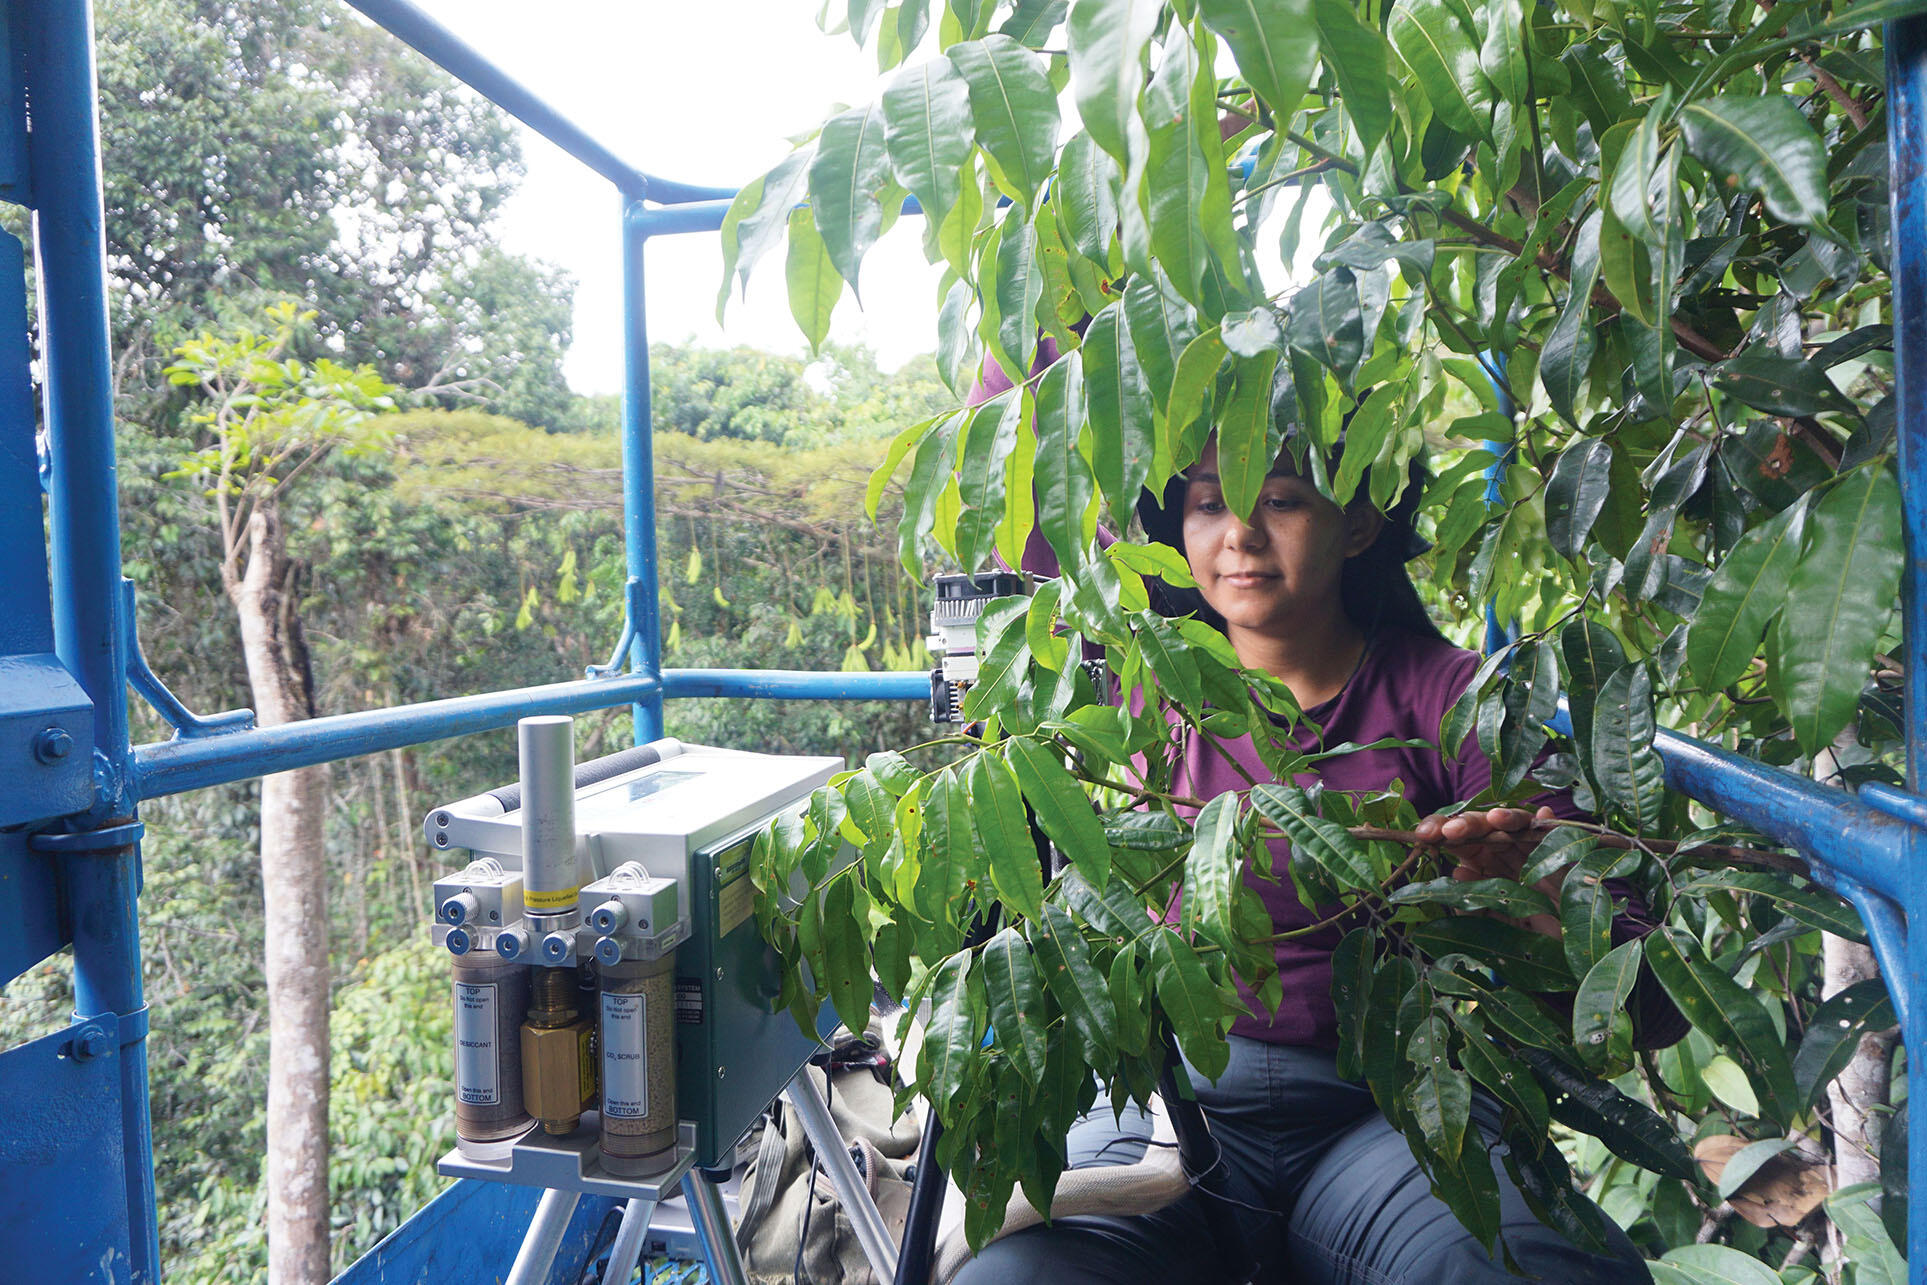 Graduate student Daisy Souza works in the lift basket among the leaves high in the rainforest canopy. (Photo courtesy of Bruno Oliva Gimenez.)